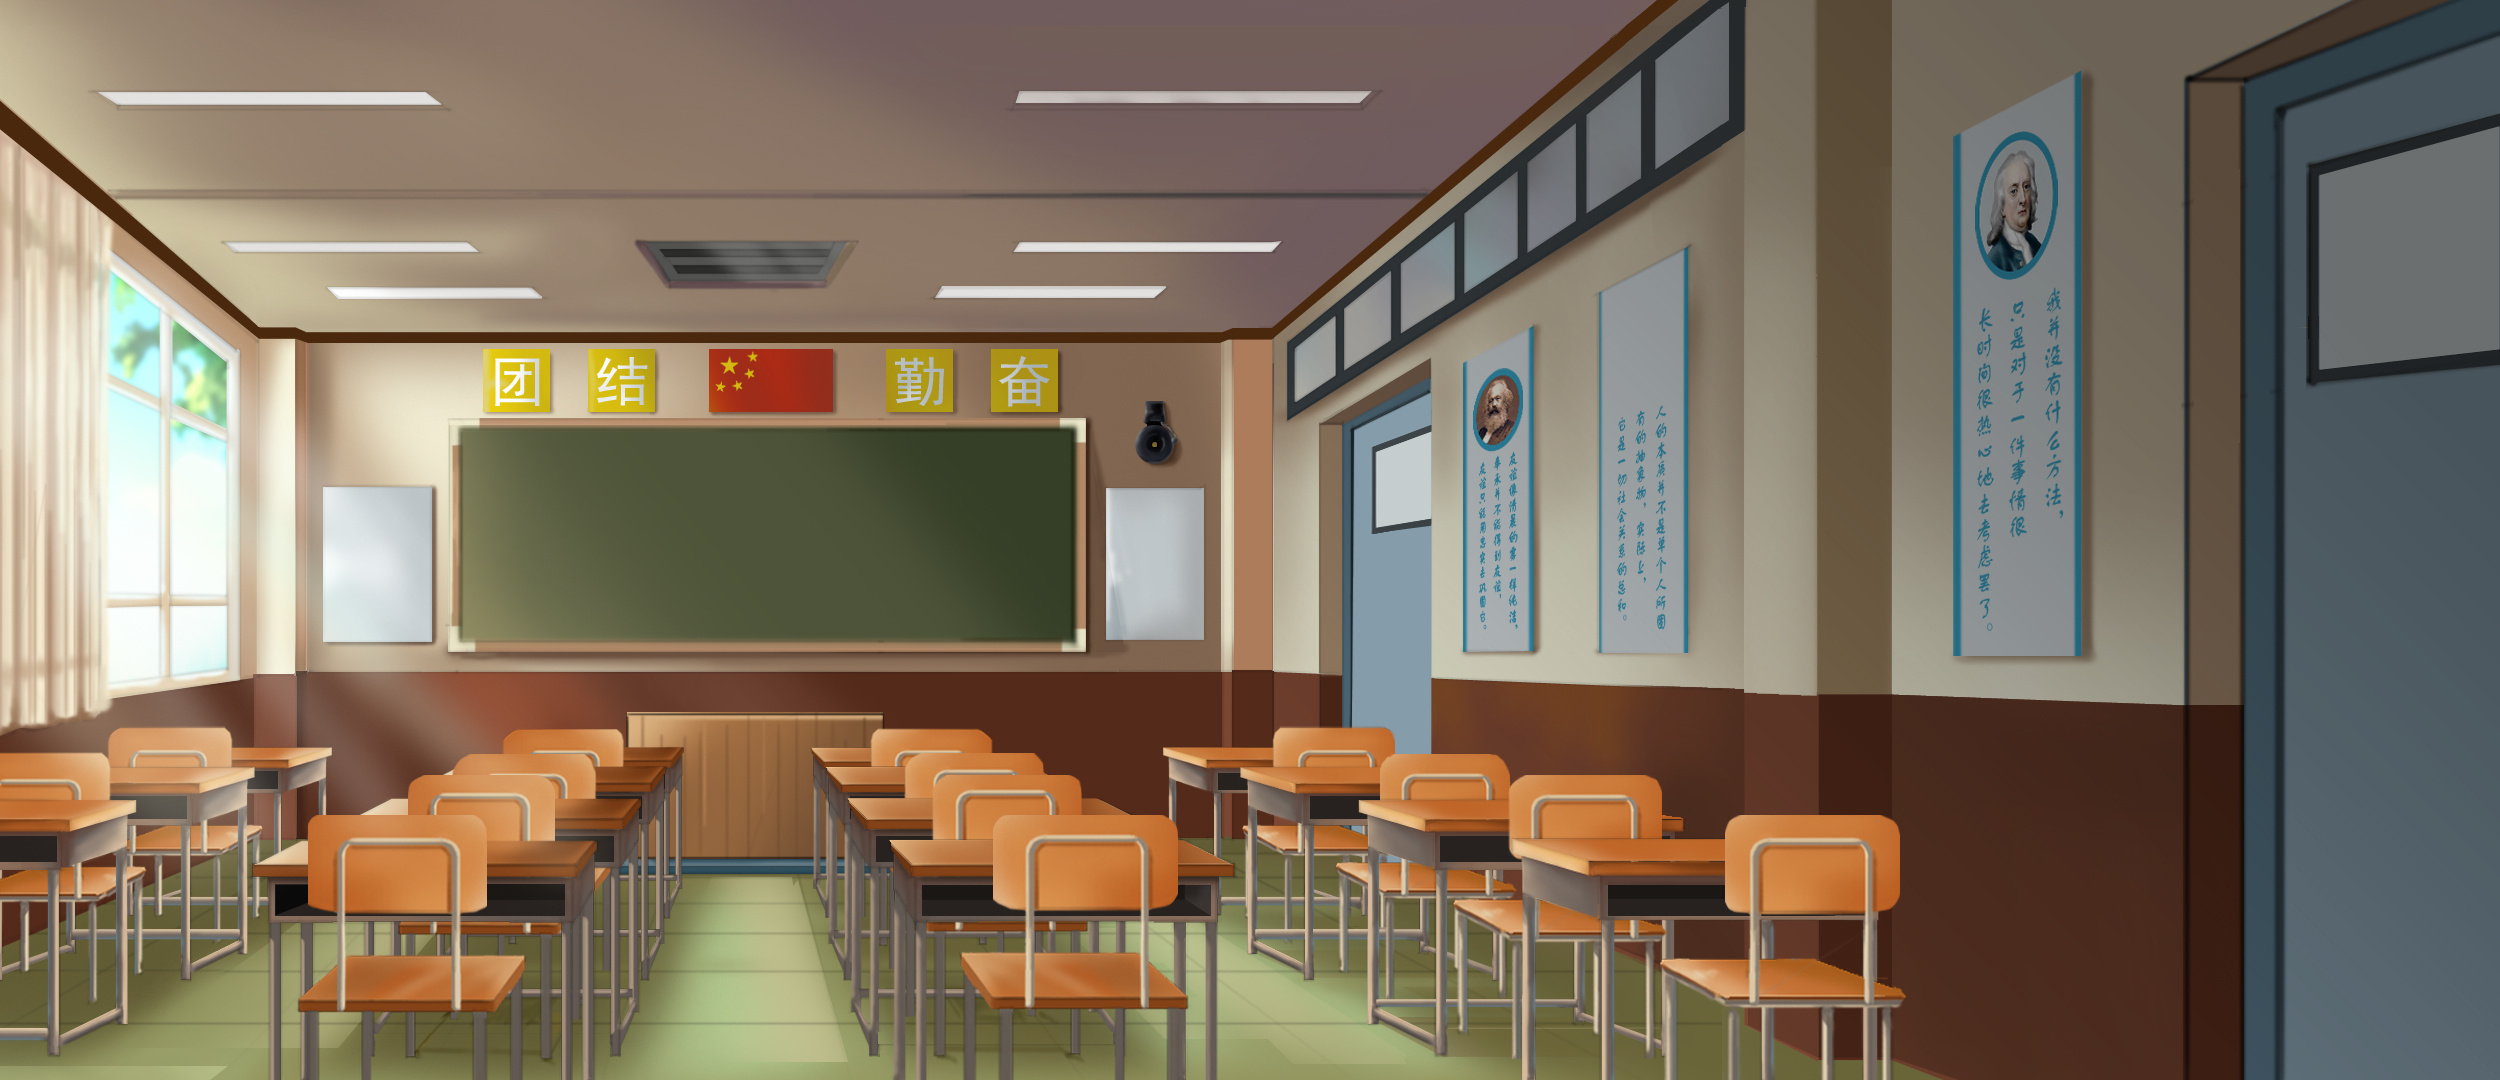 Anime Classroom Wallpapers - Top Free Anime Classroom Backgrounds ...